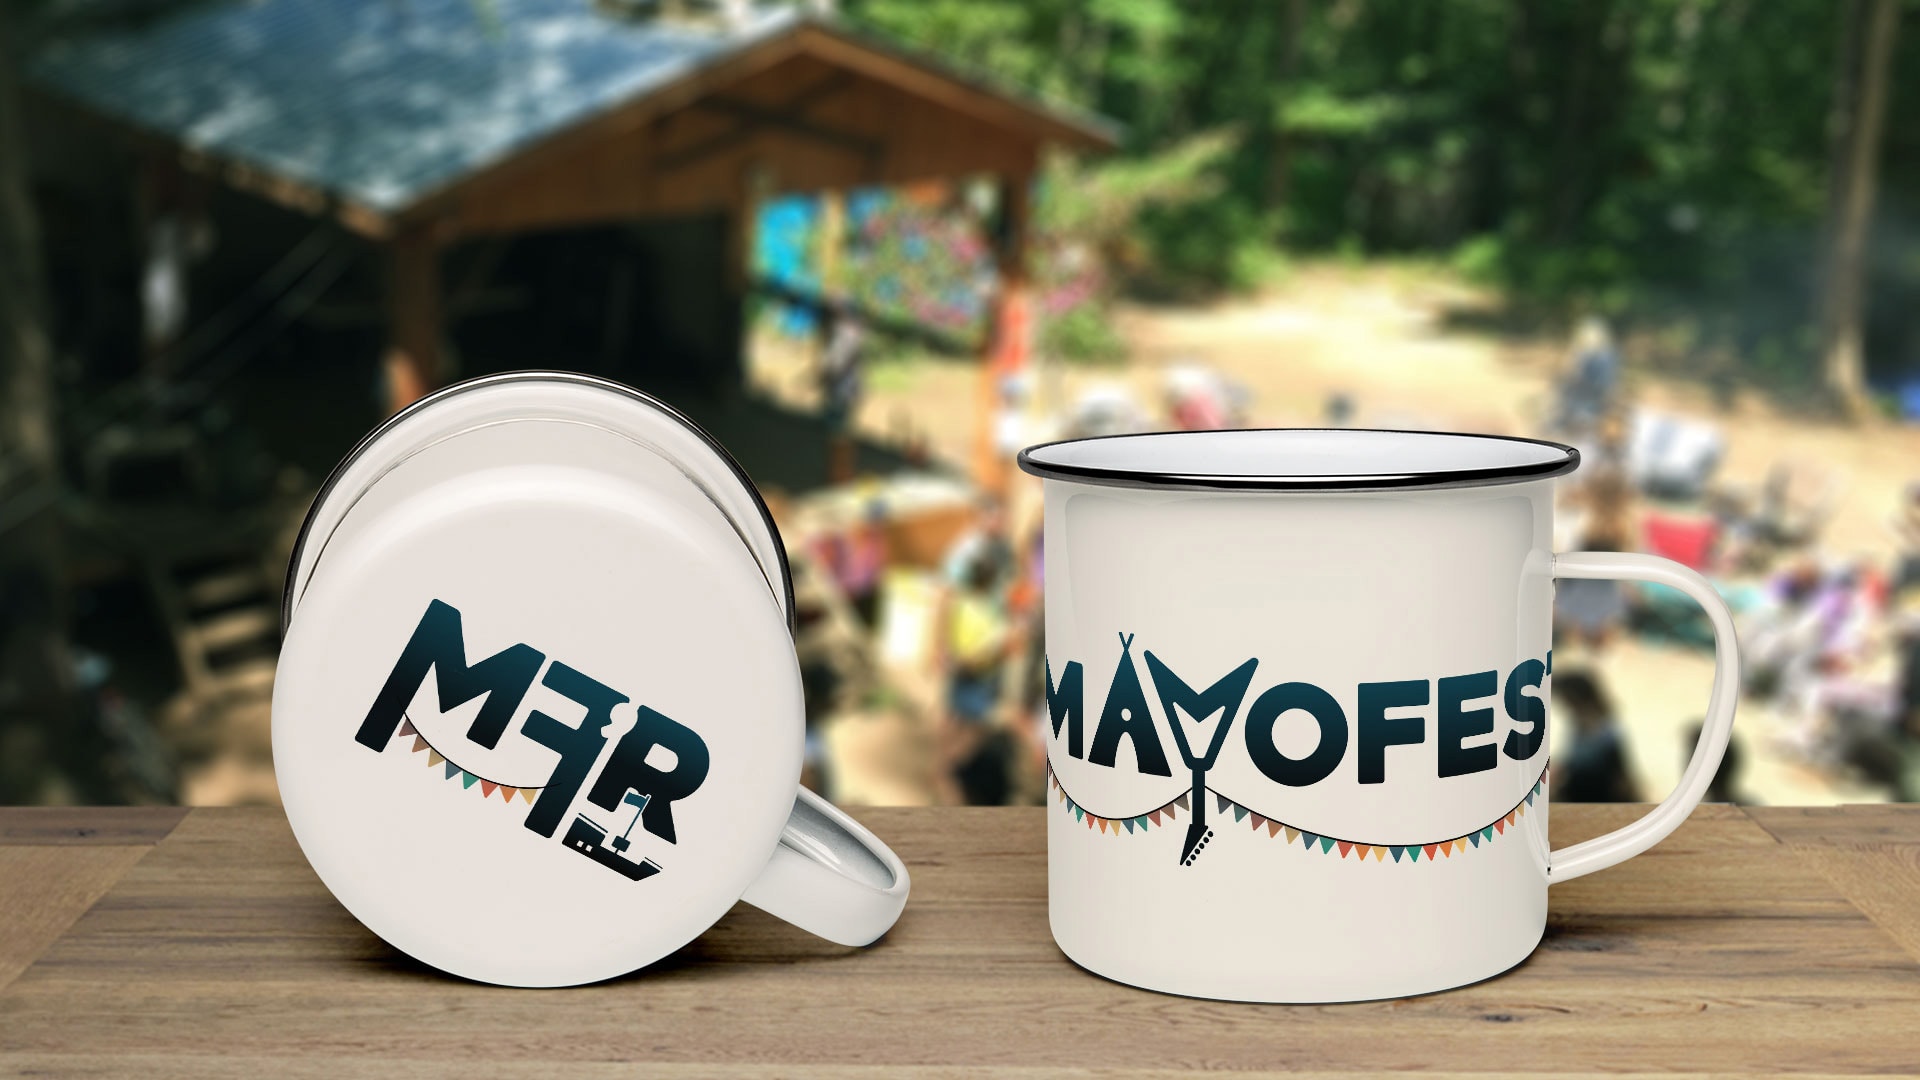 glass is not allowed at Mayofest, you can bring your own plastic or metal cups, though this would be a great opportunity to make attractive merchandise.